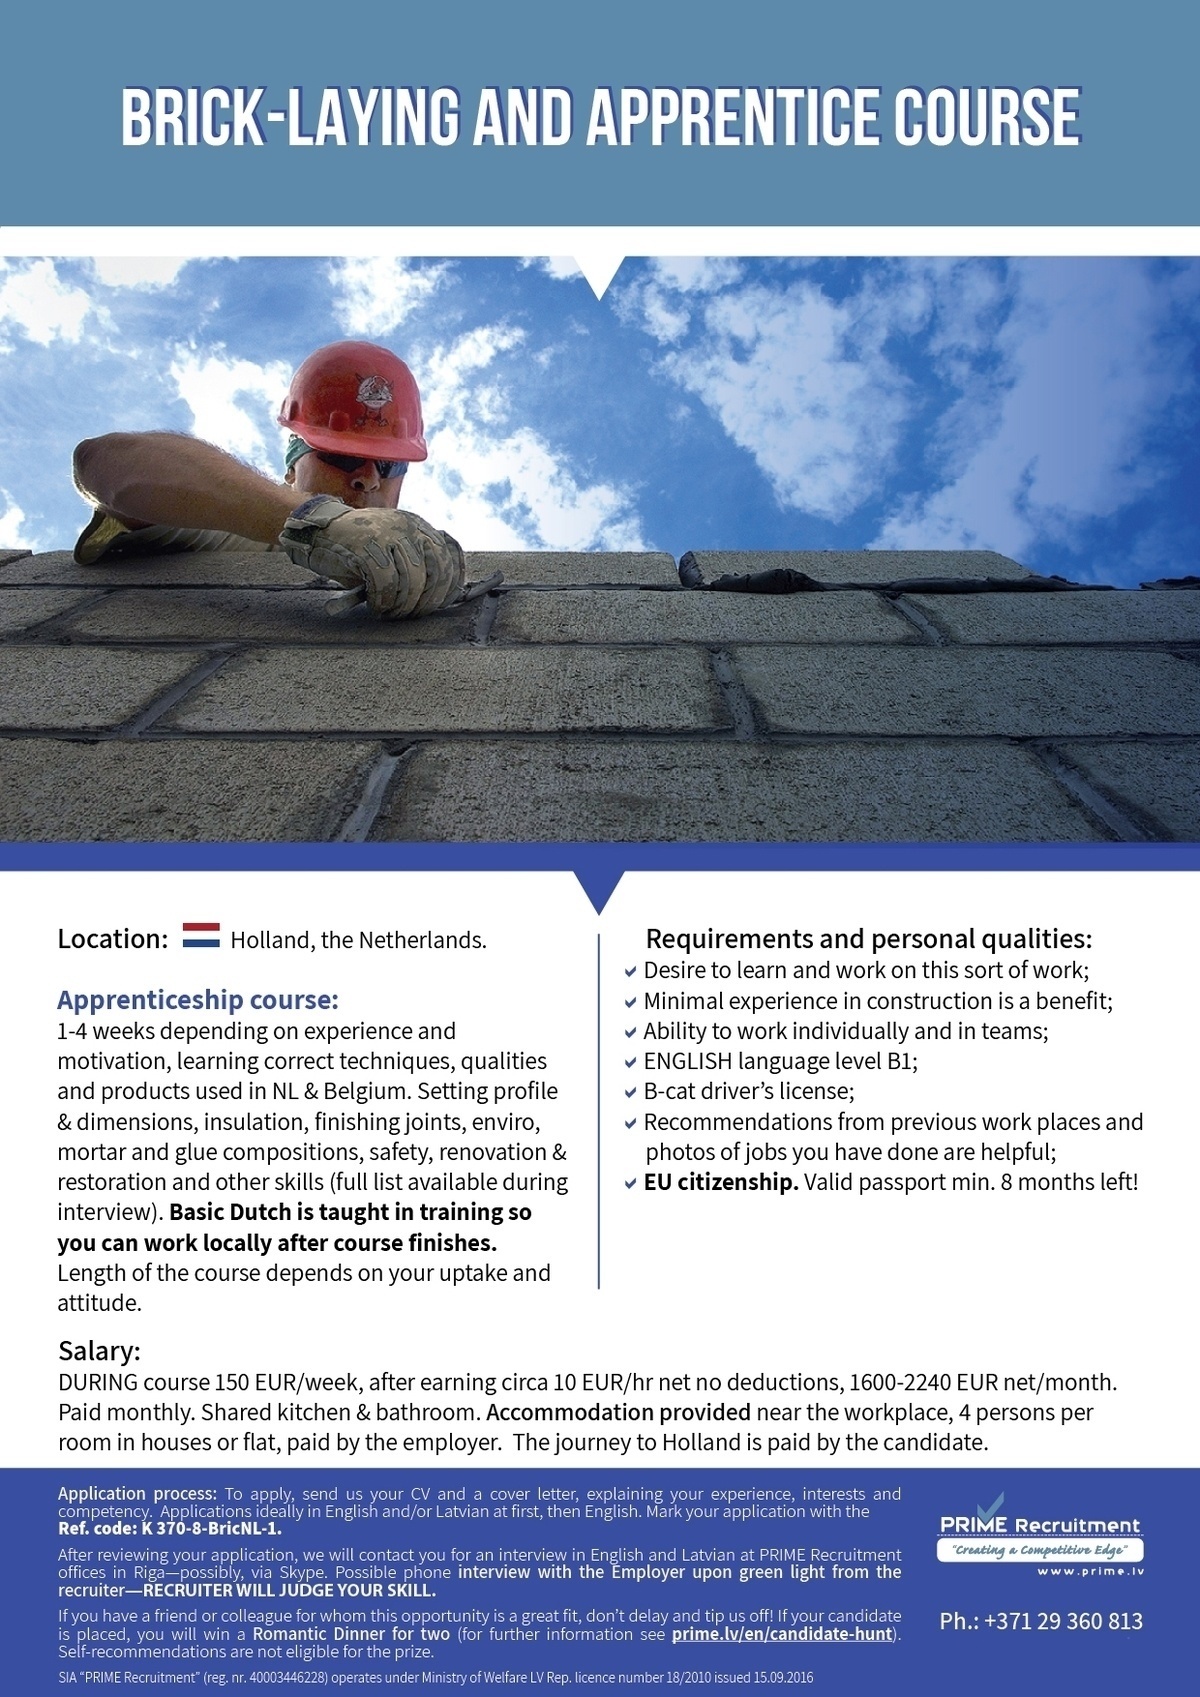 CV Market client Brick-laying and Apprentice Course